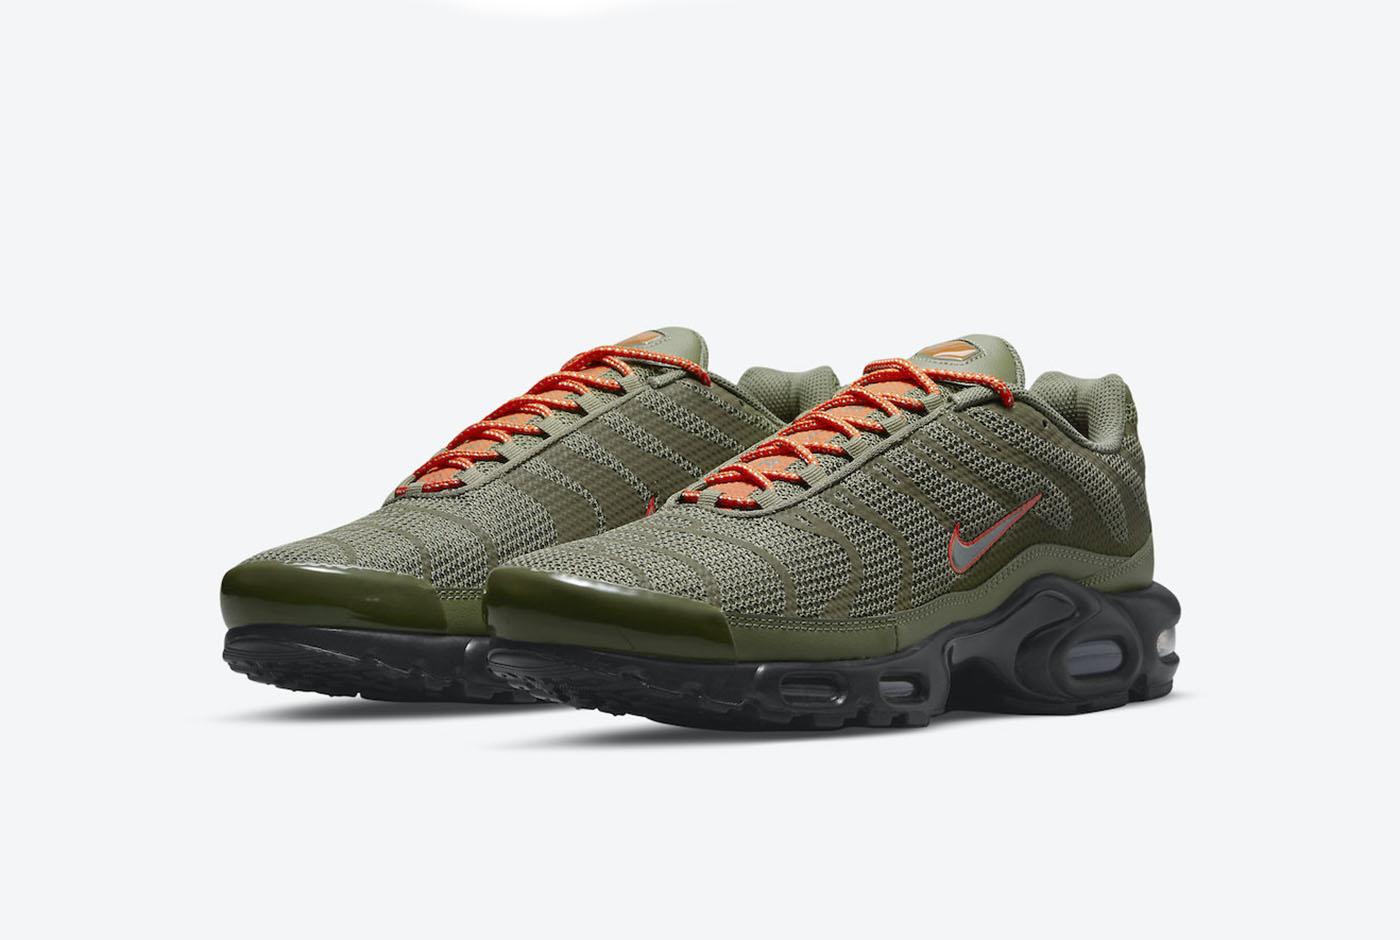 biblioteca Original Incienso The Nike Air Max Plus "Olive Reflective" is Ready for the Fall | SoleSavy  News